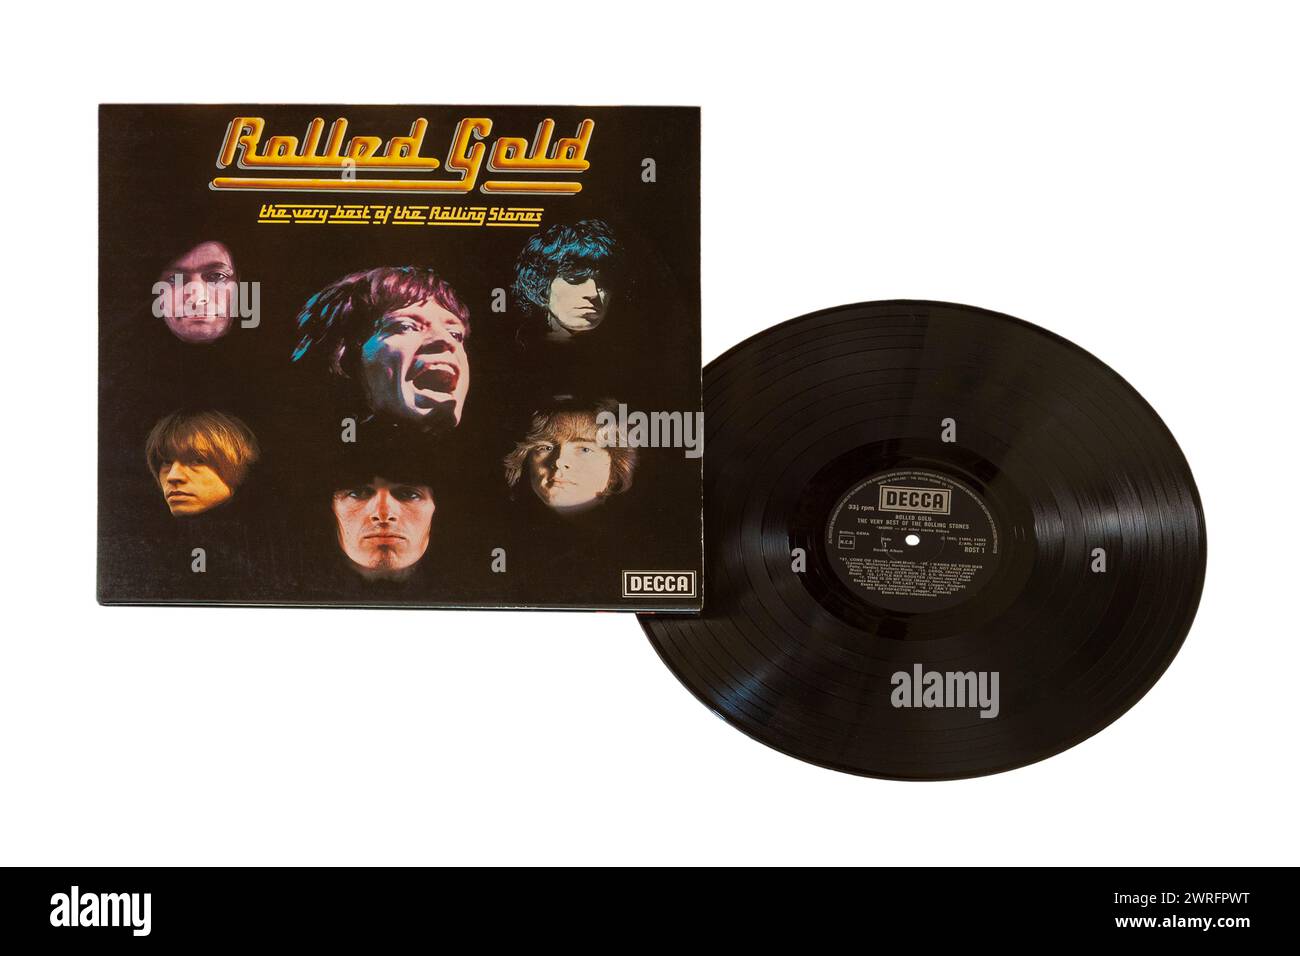 Rolled Gold the very best of The Rolling Stones vinyl record album LP cover isolated on white background - 1975 Stock Photo